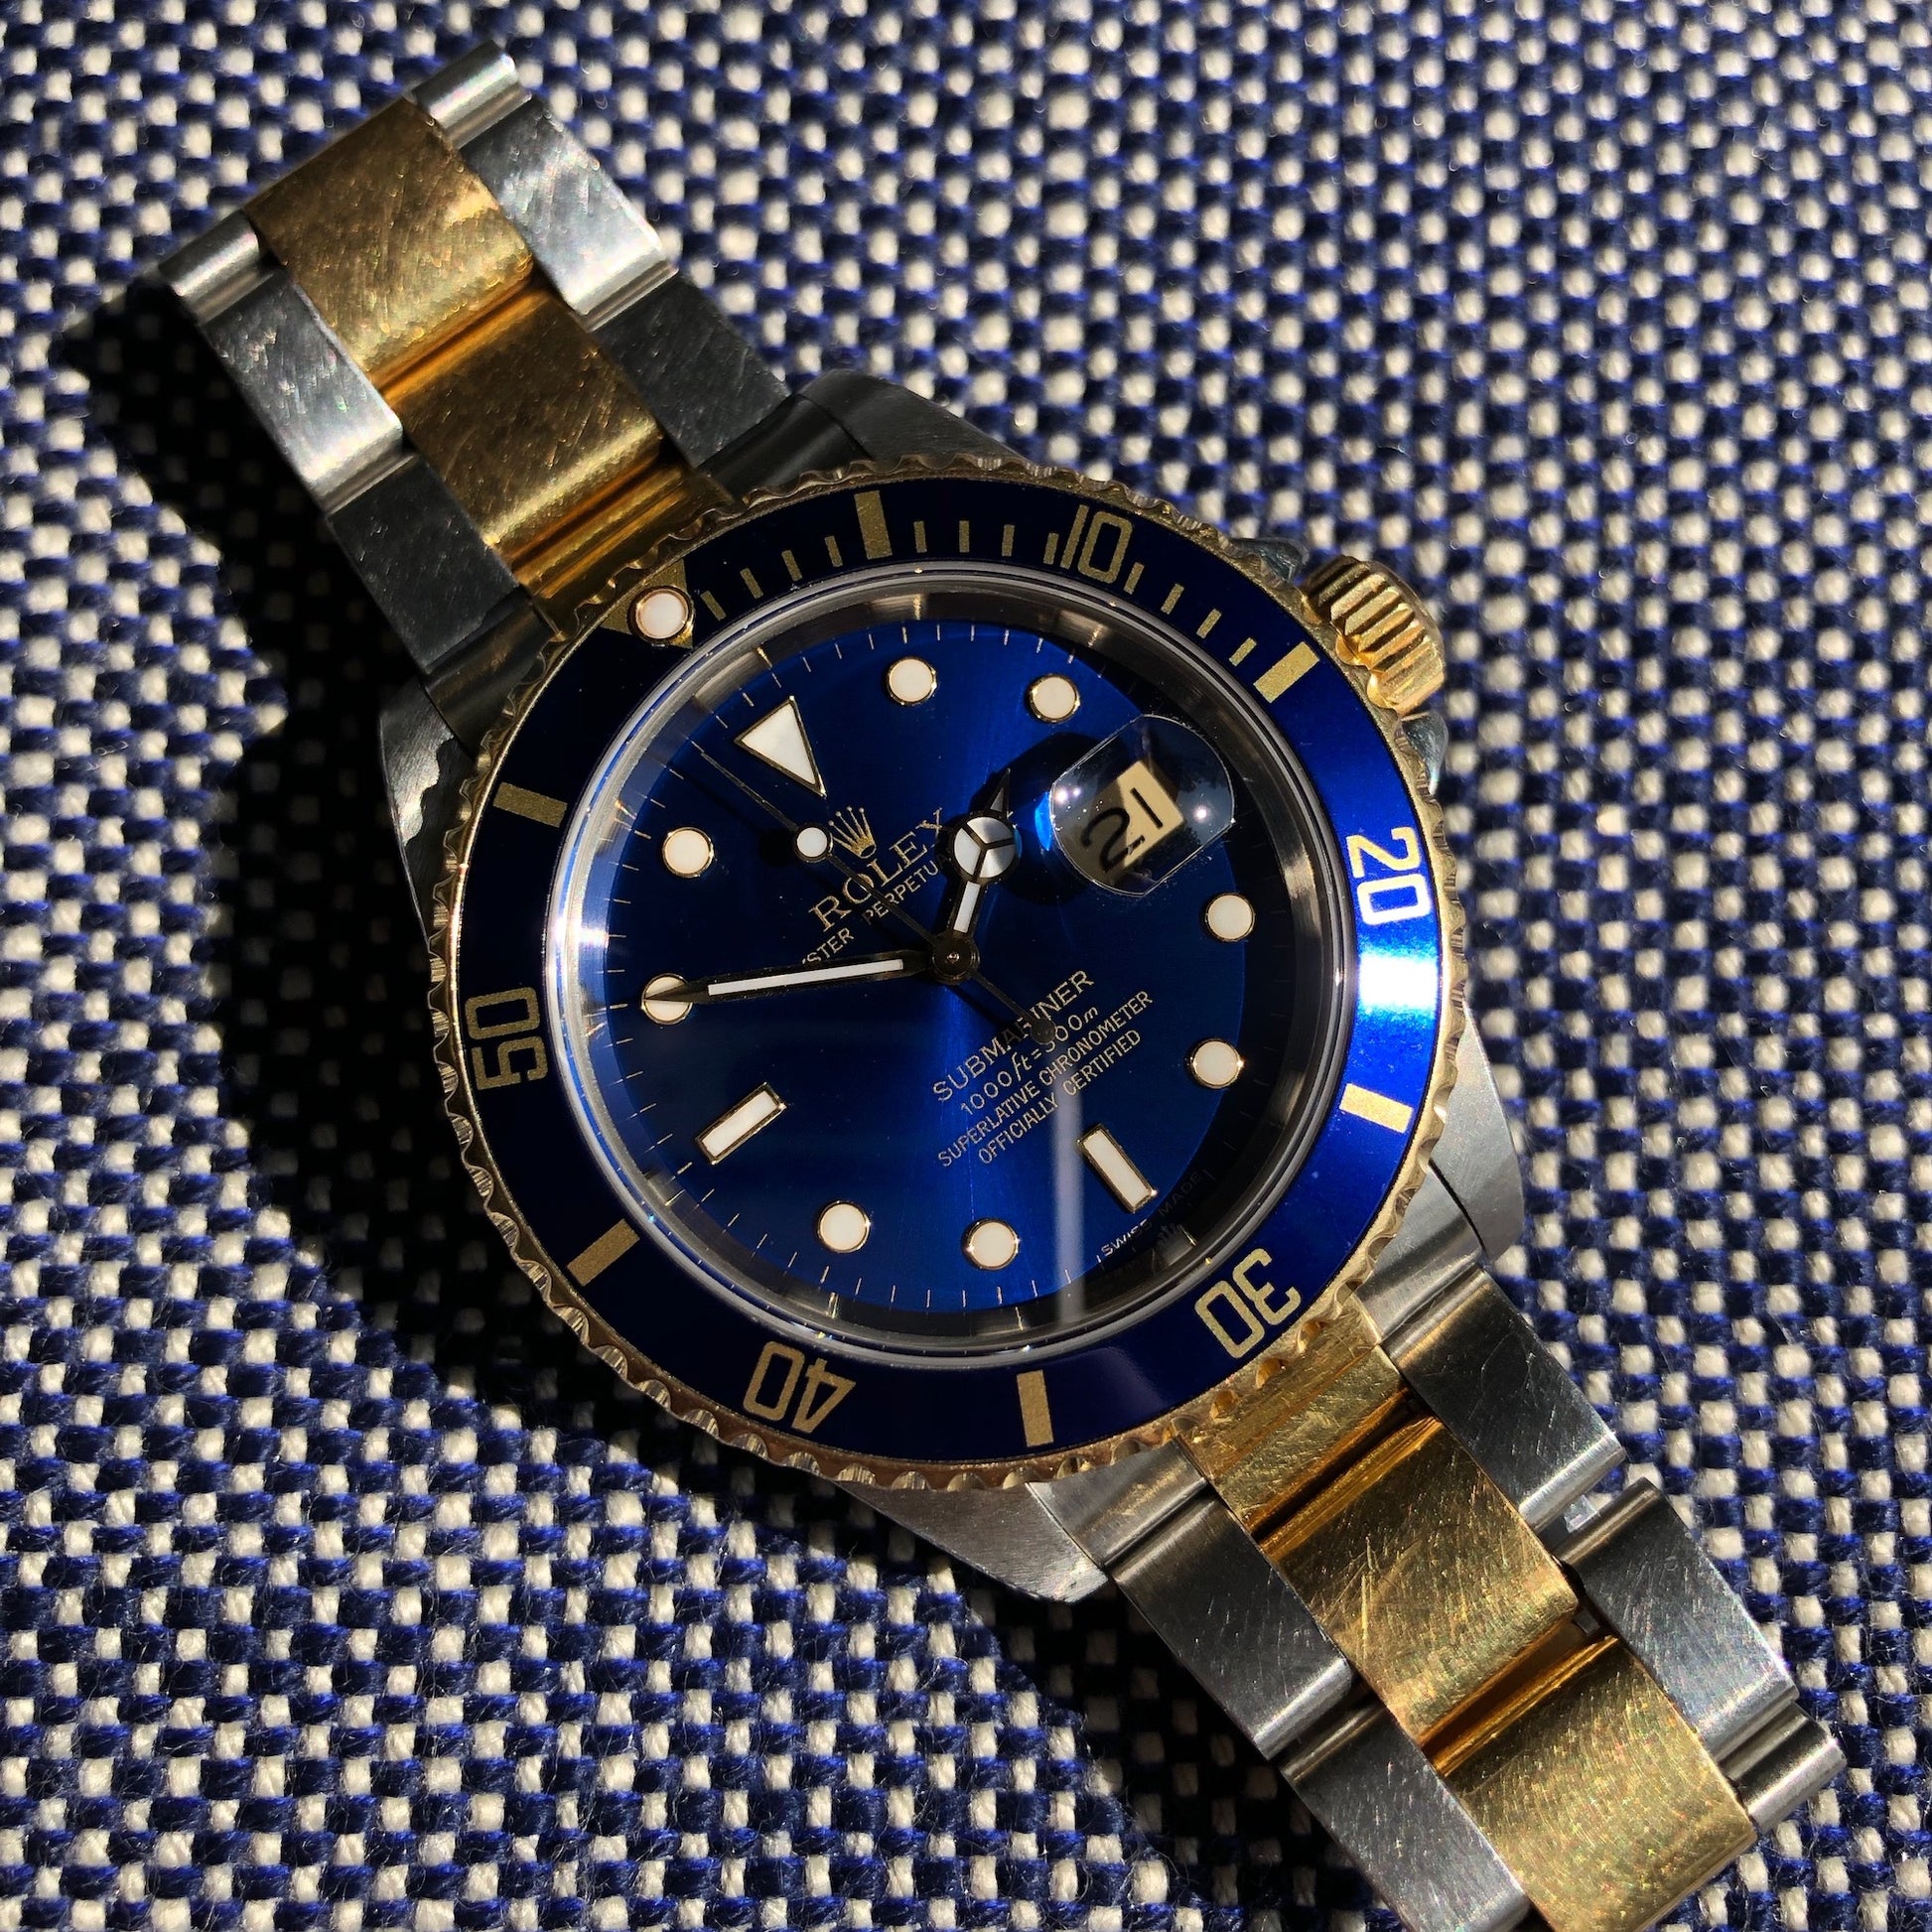 Rolex Submariner Date 16613 Two Tone Blue Steel 18K Gold Wristwatch Circa 1993 Box & Papers - Hashtag Watch Company